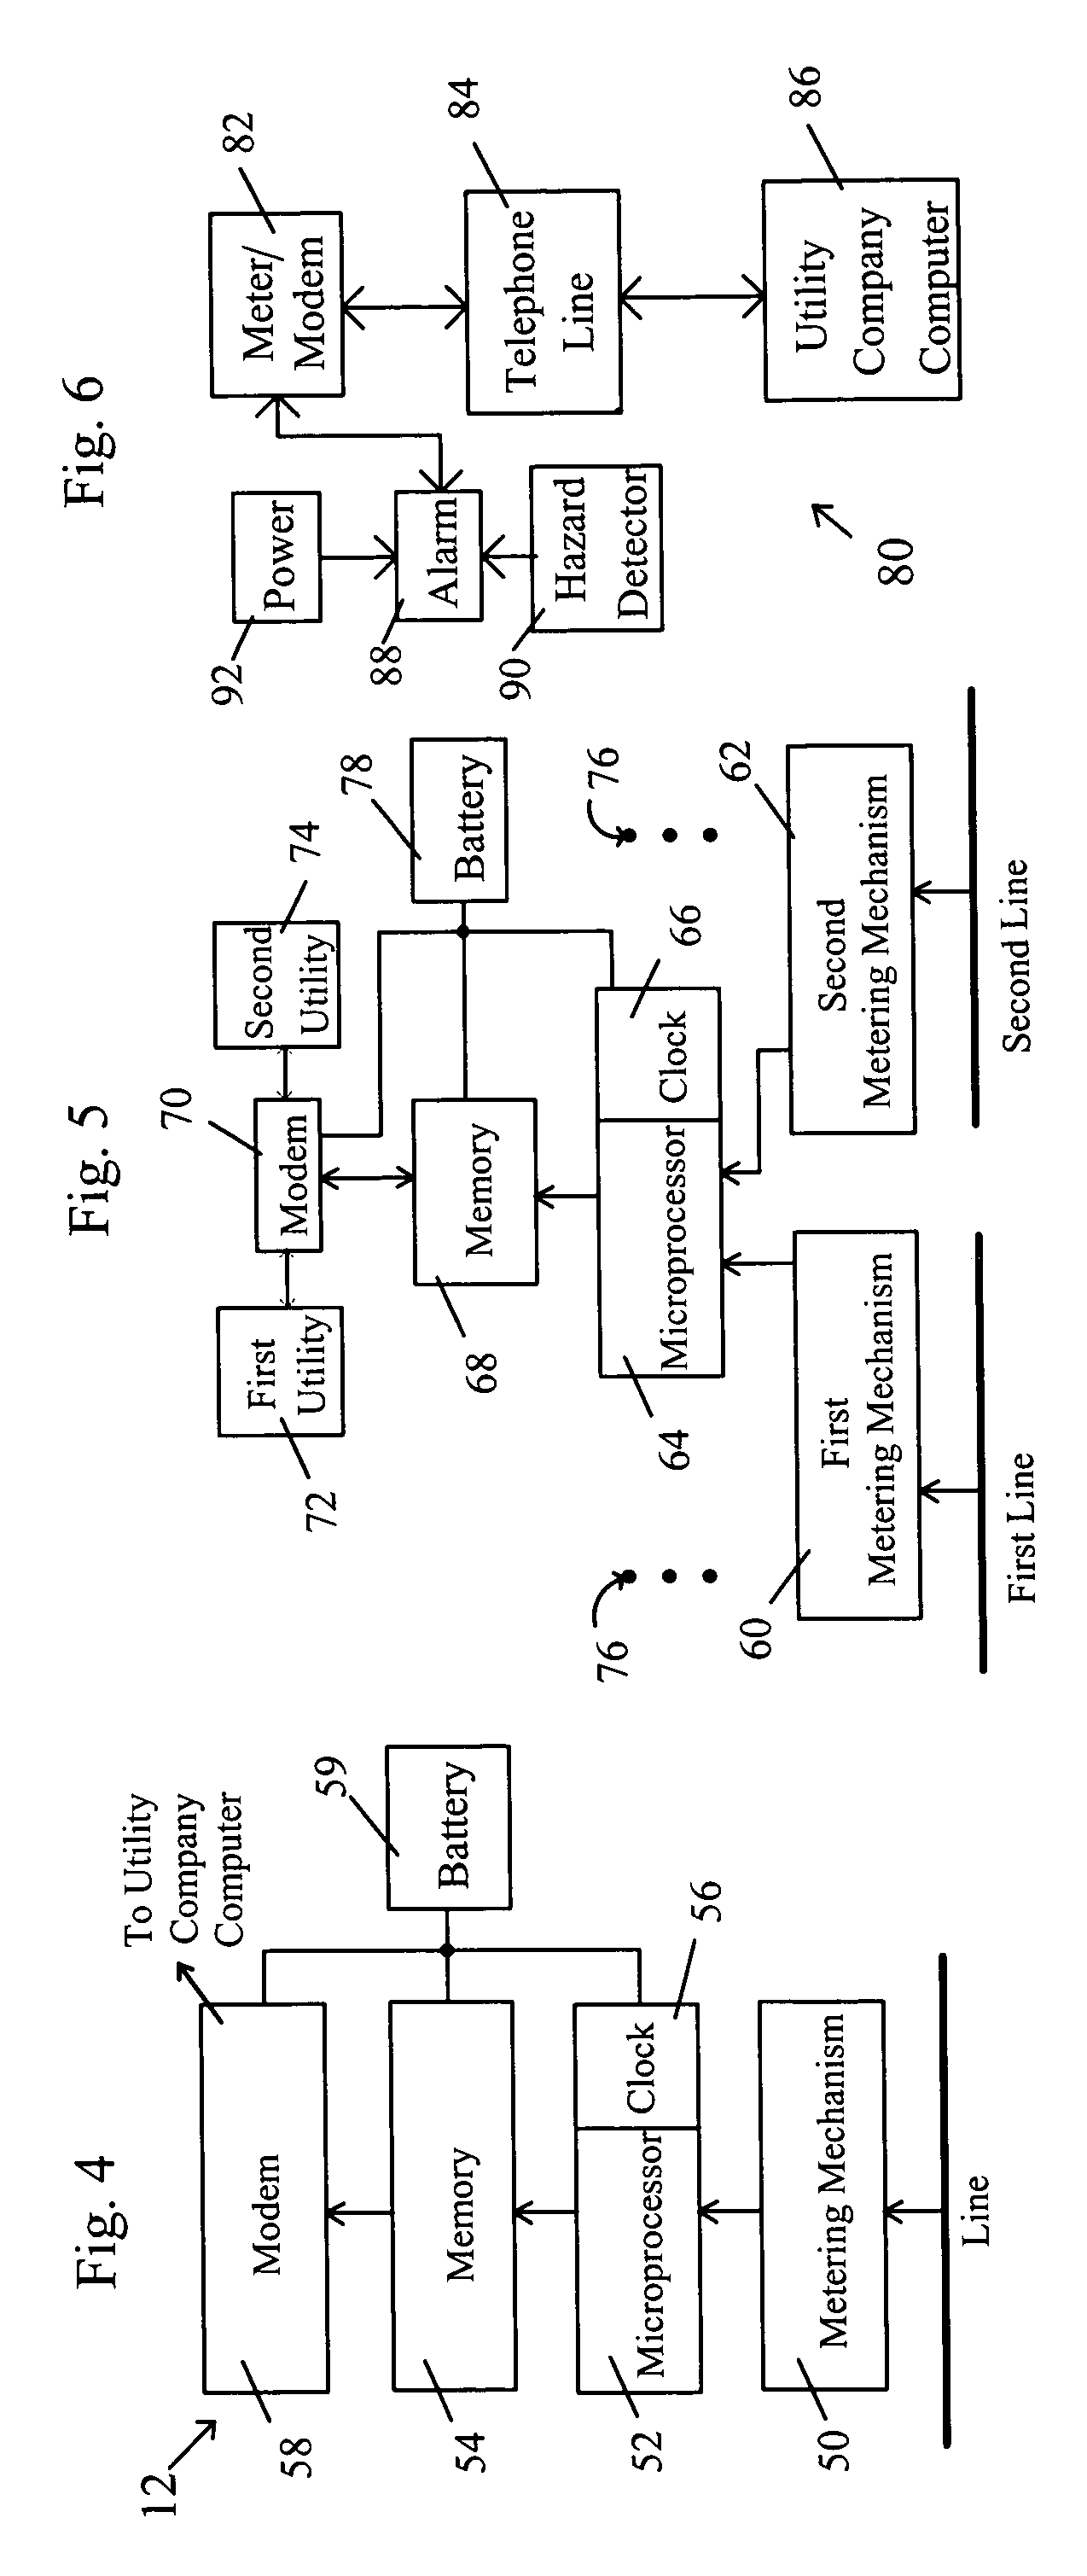 Method and apparatus for all-purpose, automatic remote utility meter reading, utility shut off, and hazard warning and correction